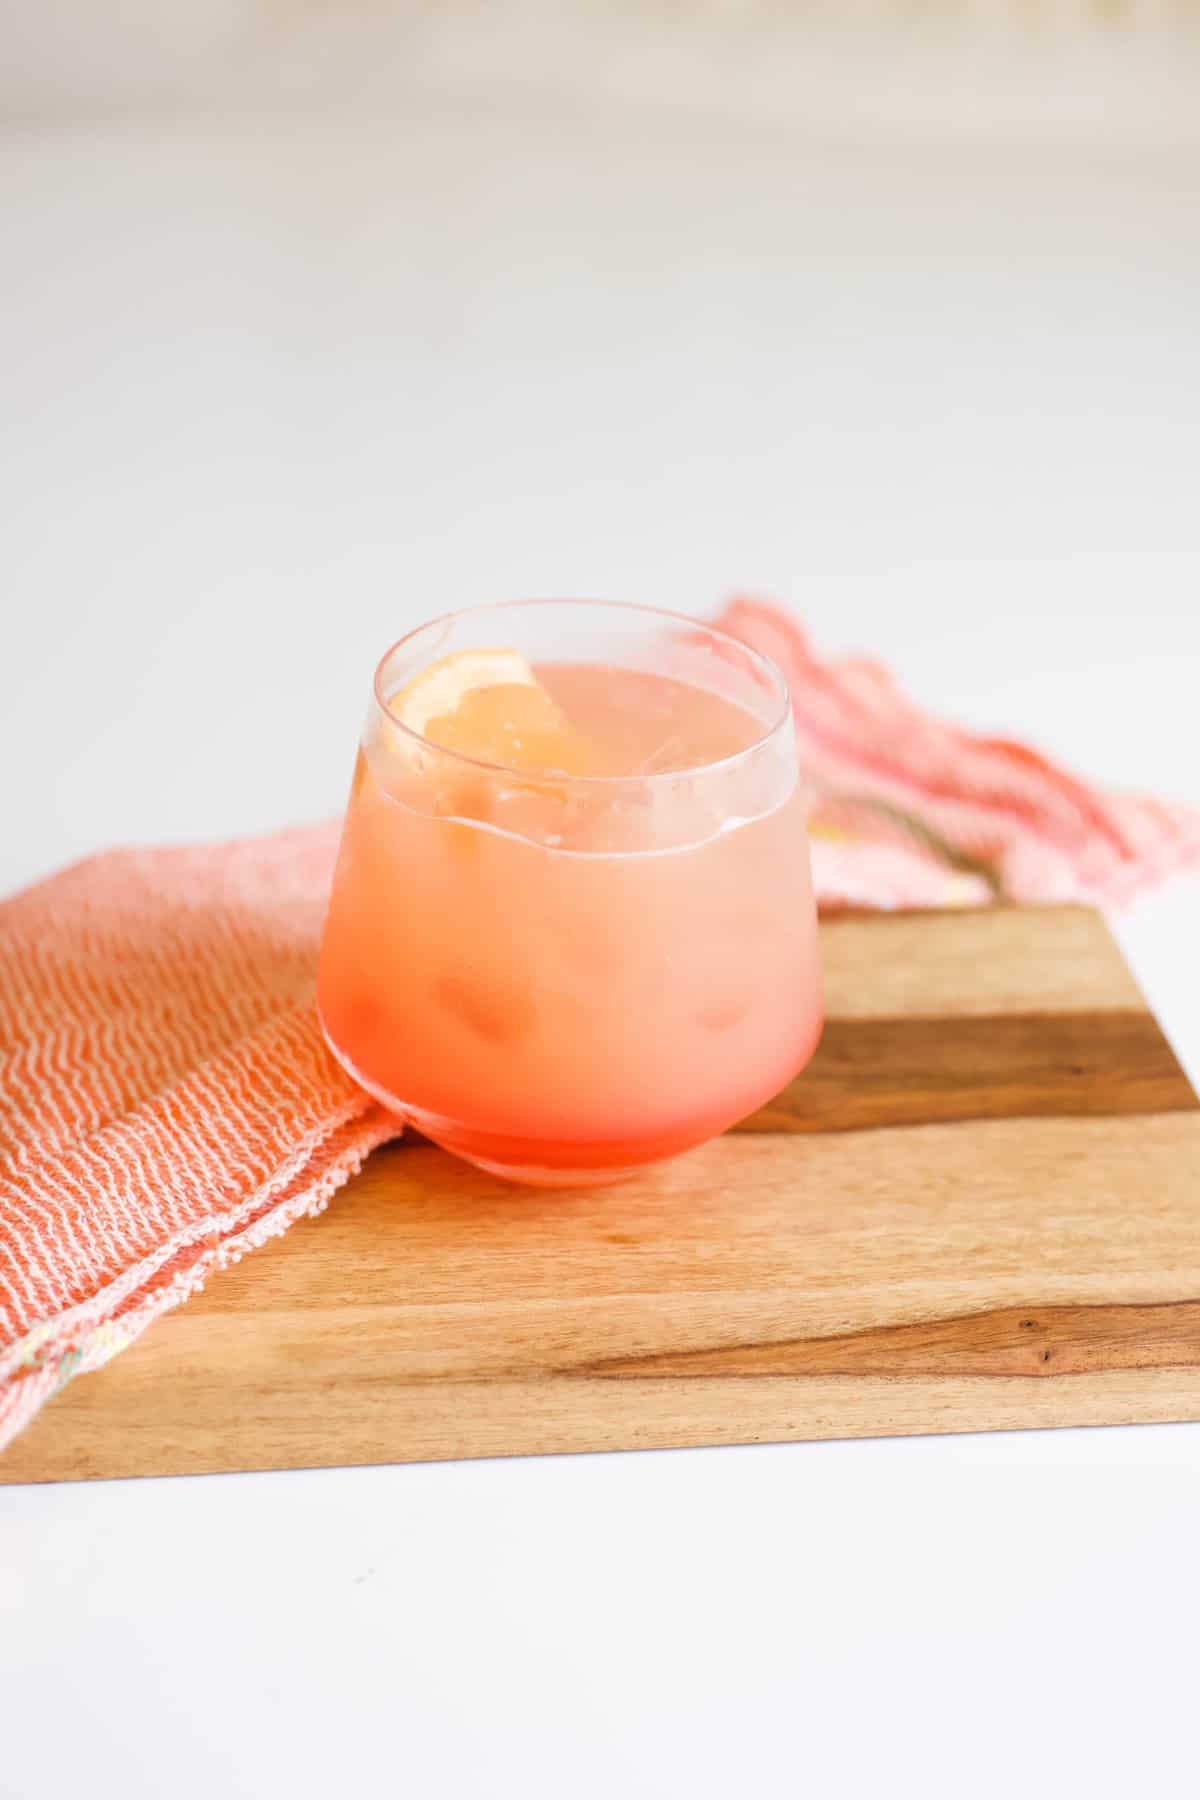 Pretty sunrise cocktail in a short cocktail glass on a wooden board on a table.